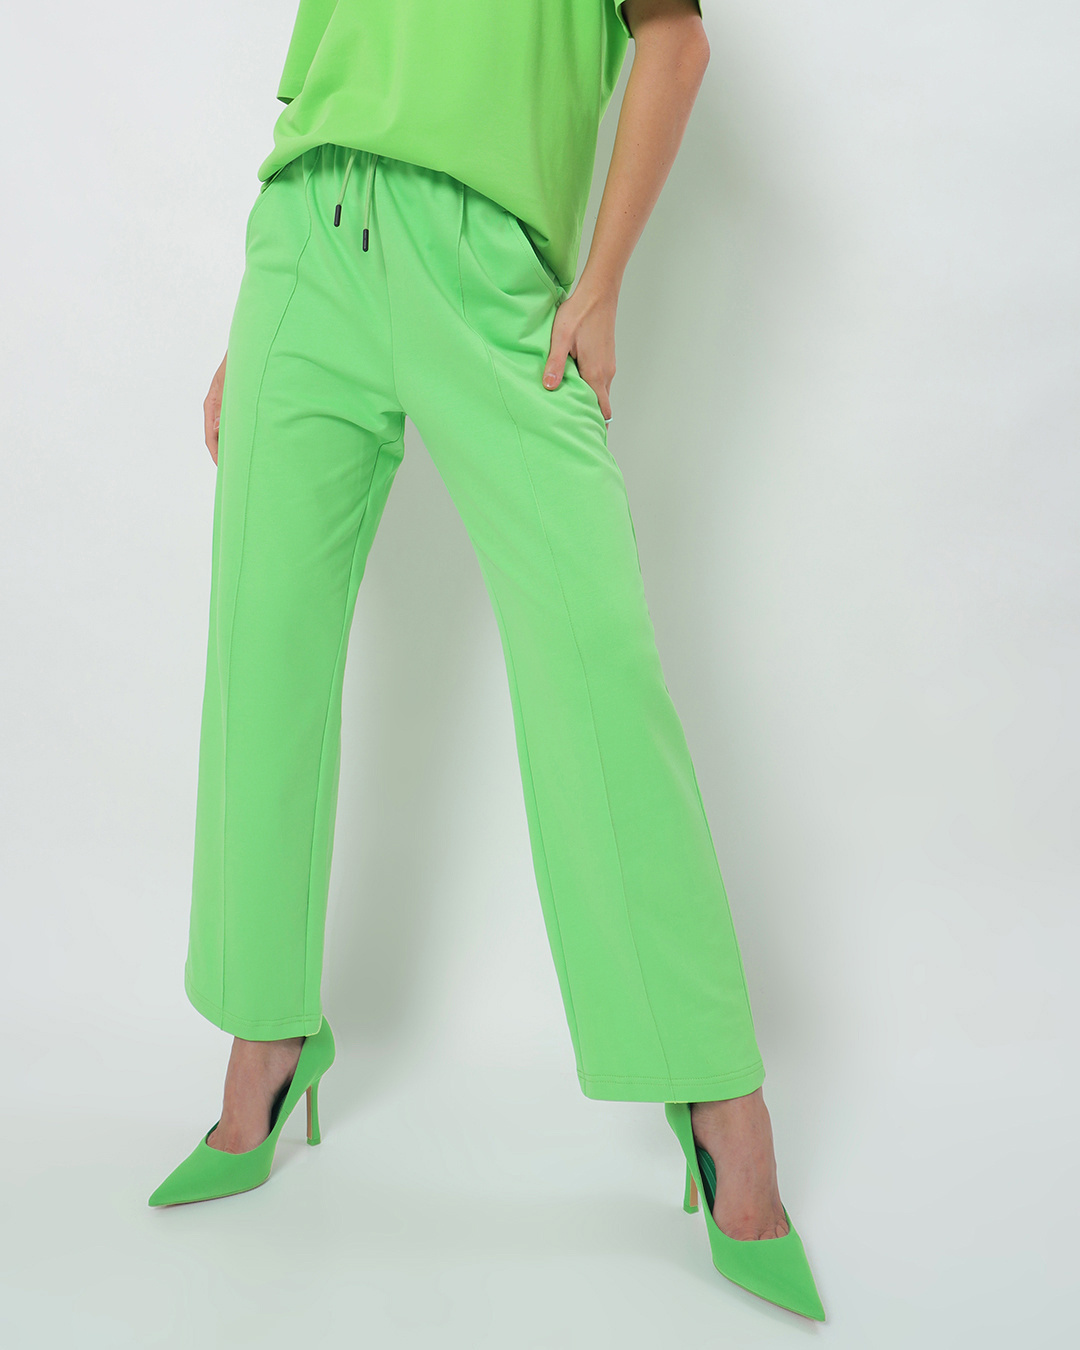 Buy Women's Green Chilled Out Relaxed Fit Pants for Women Jasmine Green ...